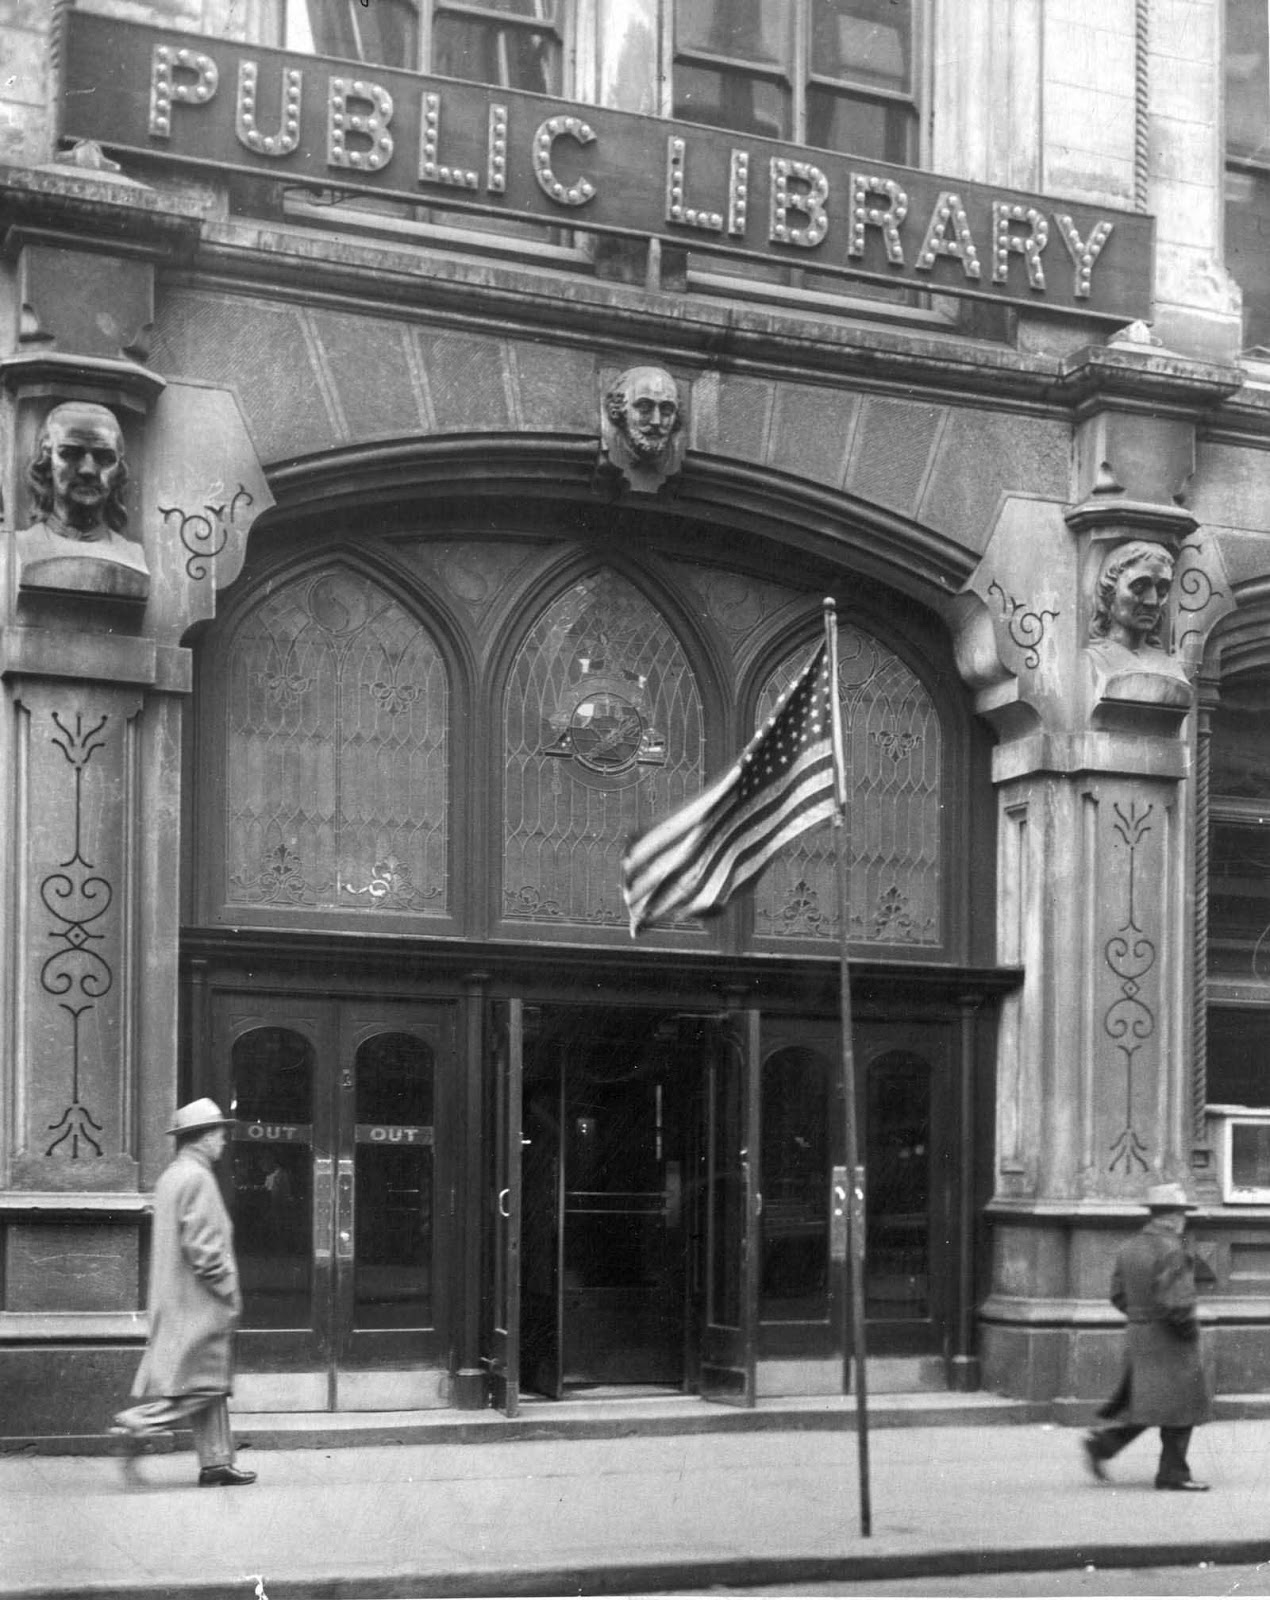 The library's main entrance.